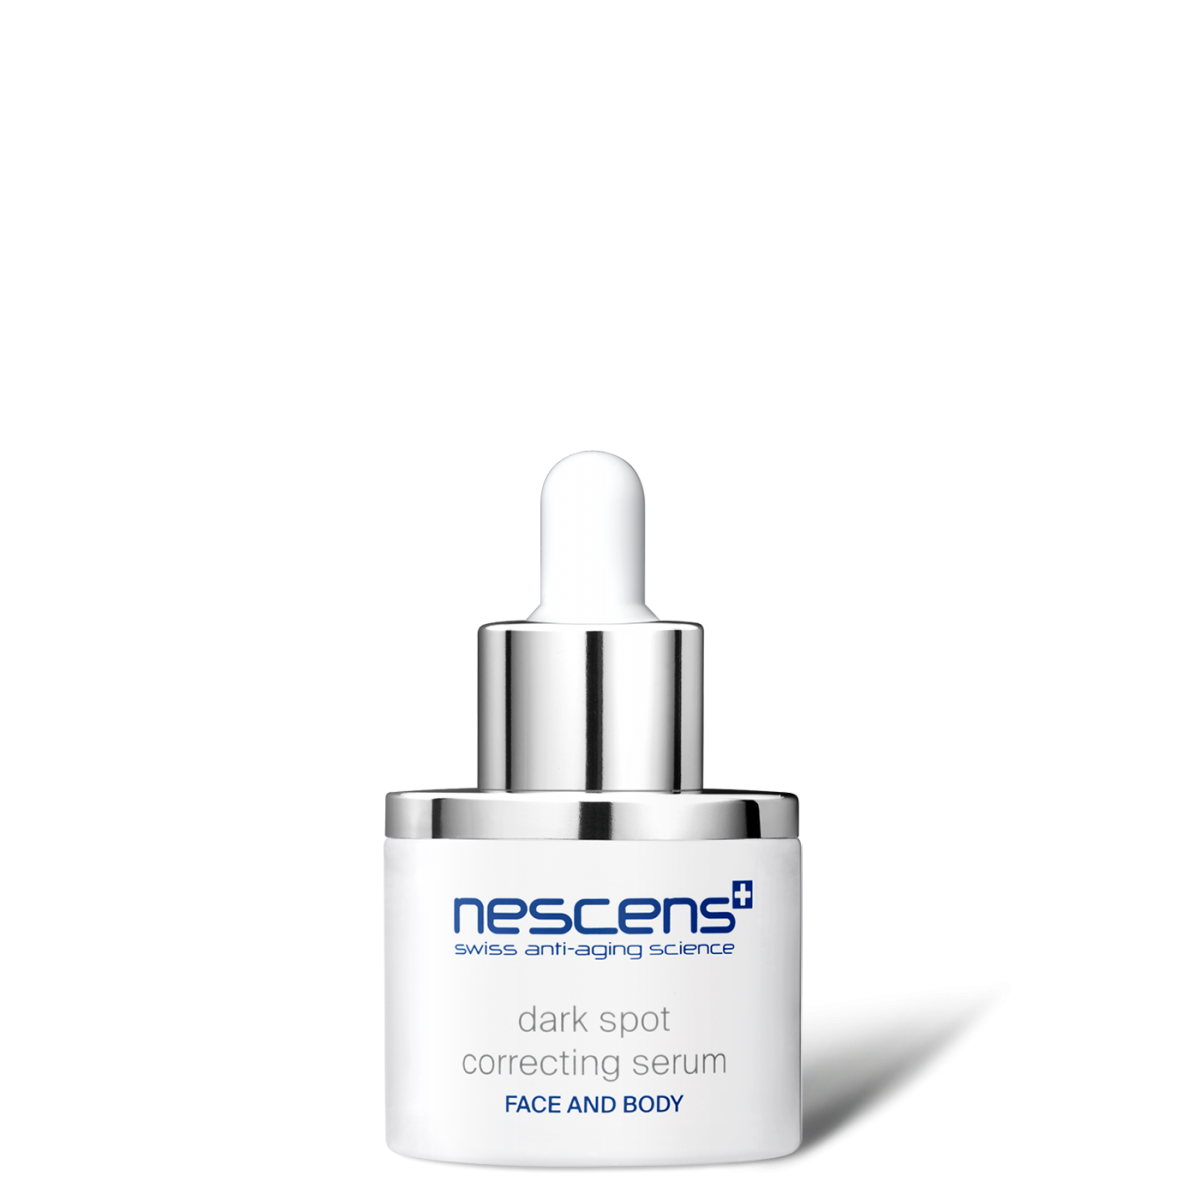 The Dark Spot Correcting Serum: pigmentary spots are faded, the uniformity and clarity of the tissues are restored